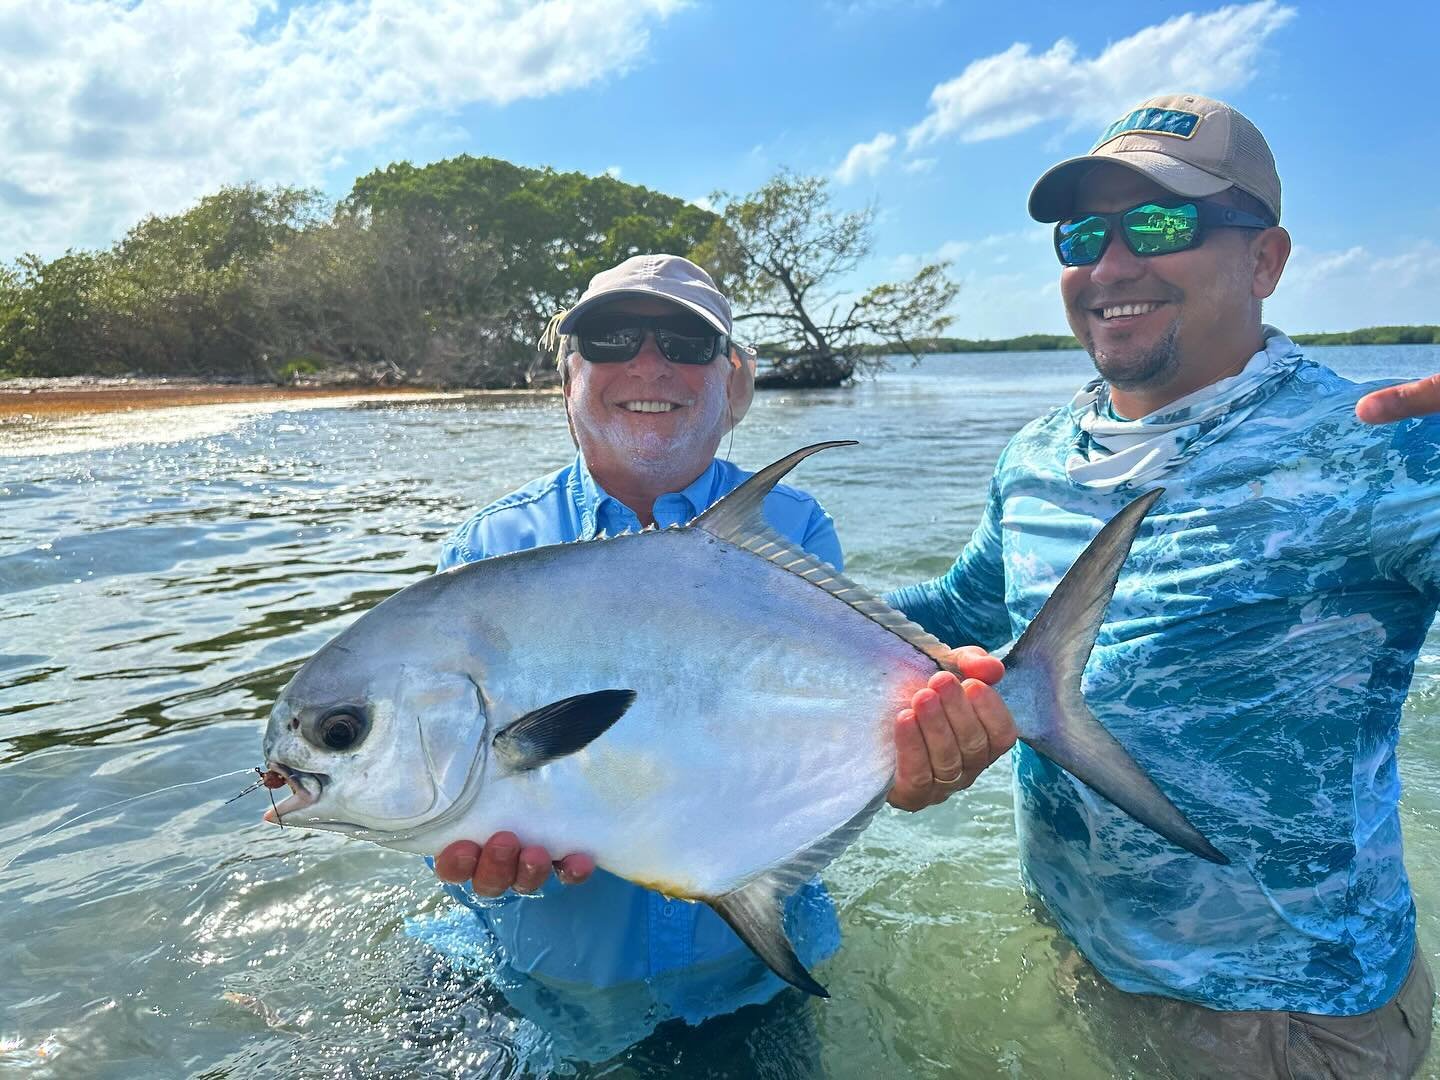 Many men go fishing all of their lives without knowing that it is not fish they are after.&rdquo; &mdash;Henry David Thoreau. 

All smiles from the lodge in Guanja guide @kendellpowery 

#flyfishing #permitfishing #honduras